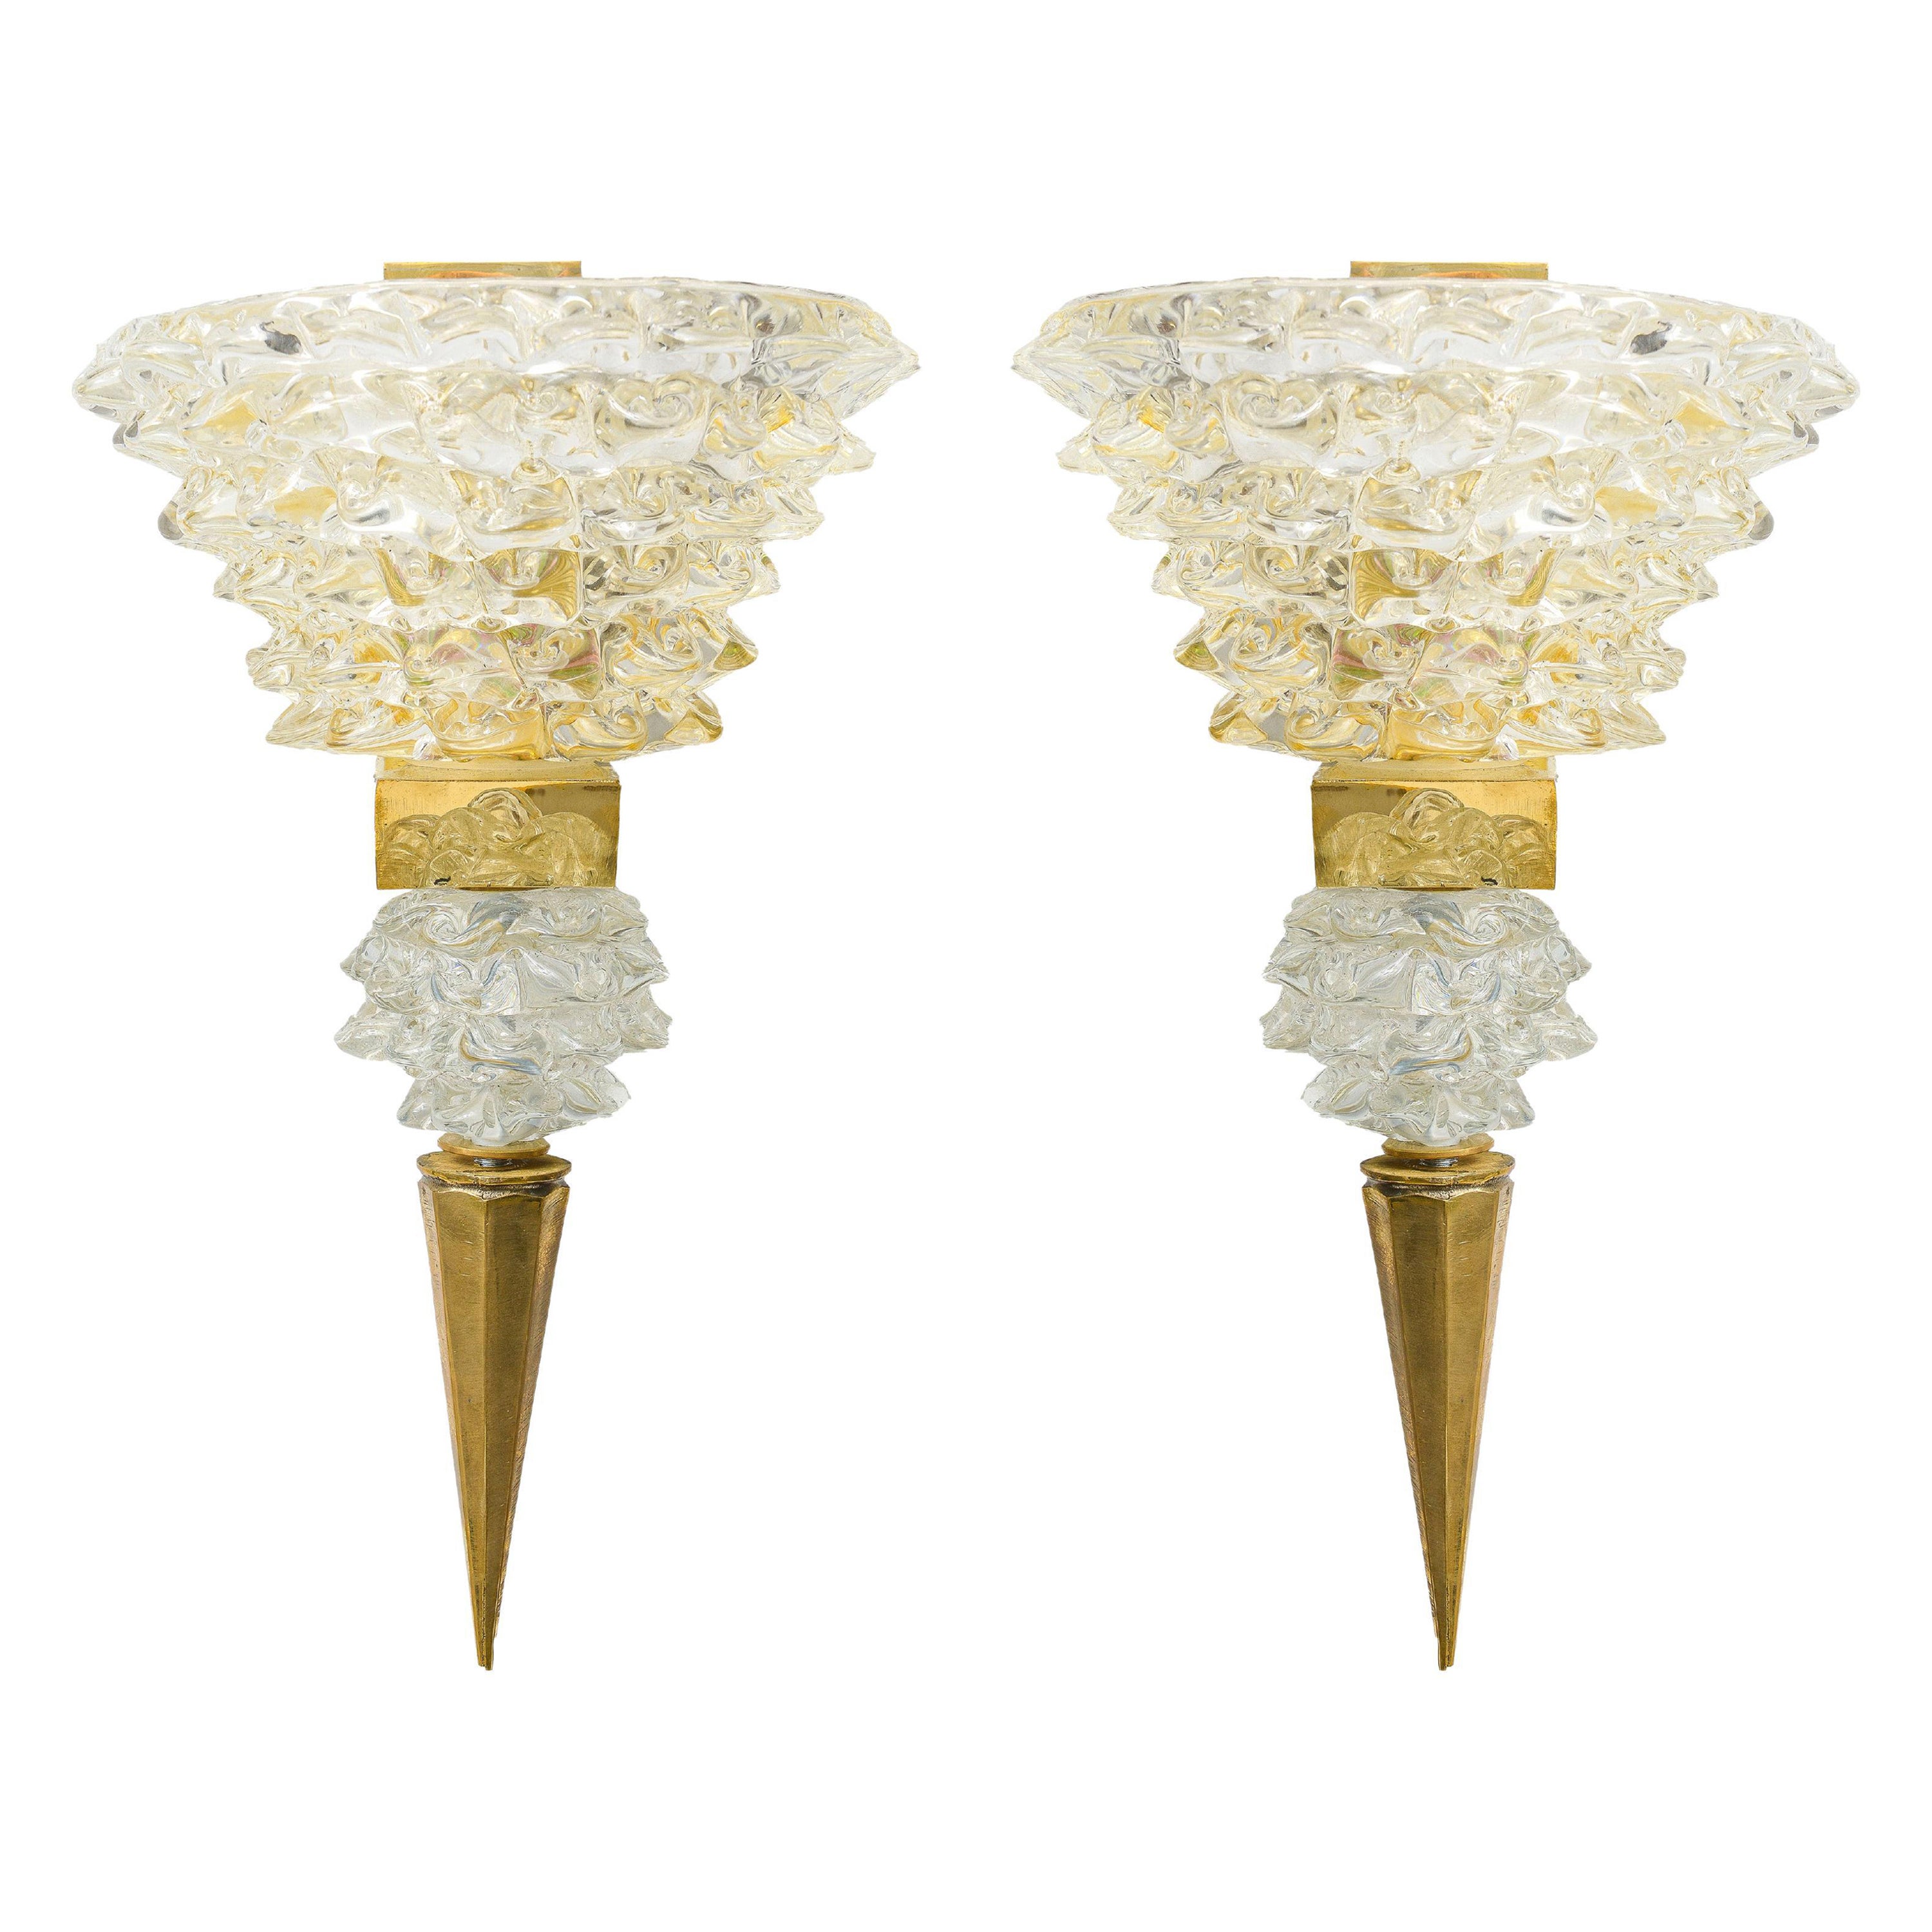 Contemporary Pair of Murano Rostrato Glass Sconces, Manner of Barovier Toso